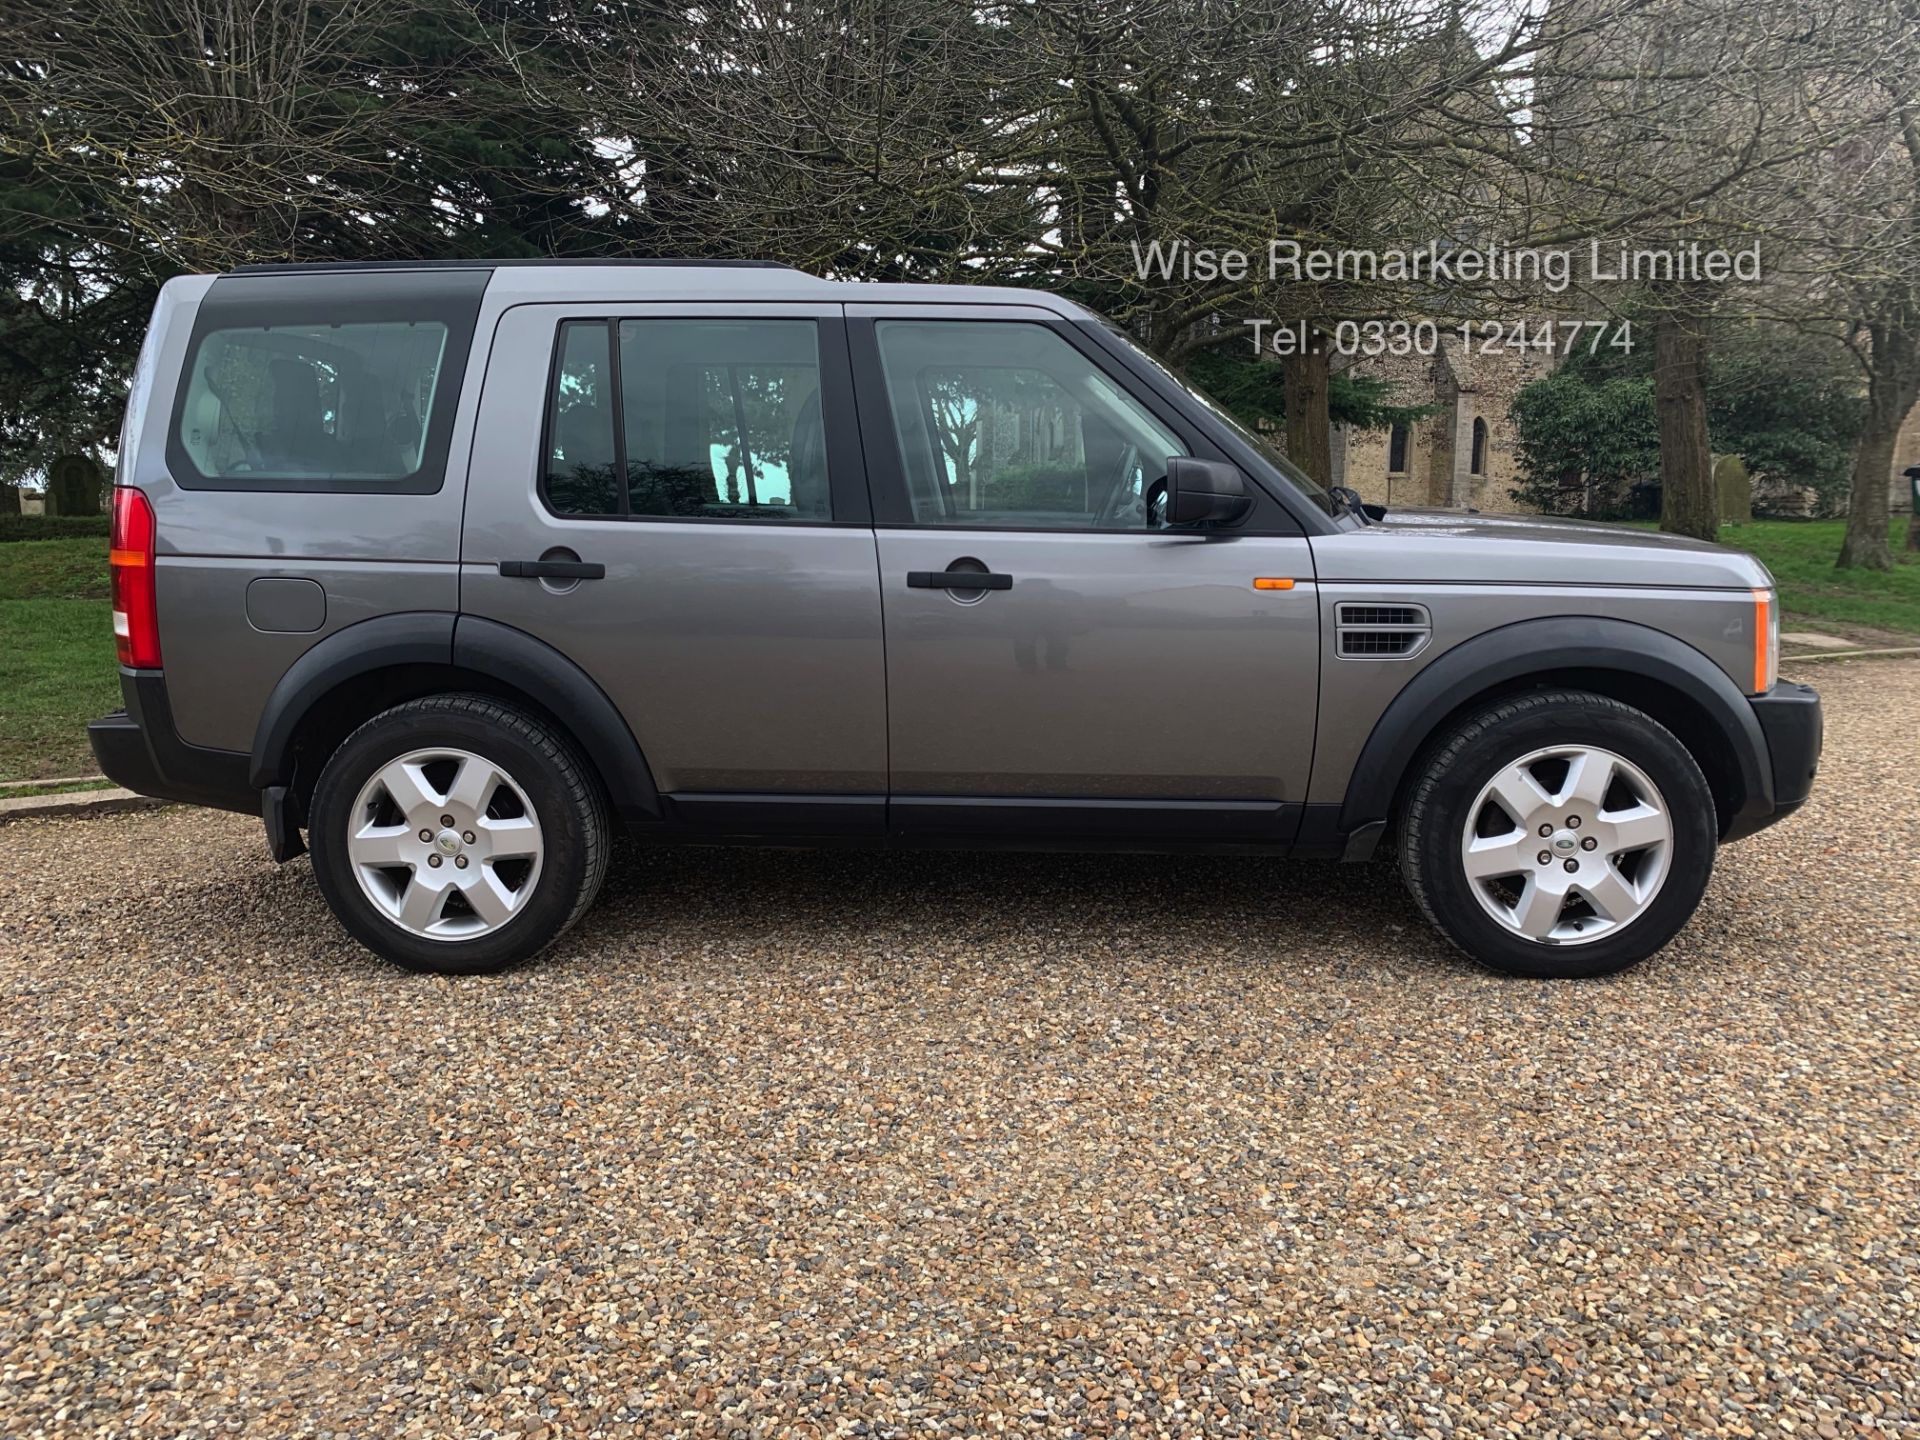 Land Rover Discovery 2.7 TDV6 HSE - Automatic - 2008 Reg - Full Leather - 7 Seater - Sat Nav - - Image 8 of 31